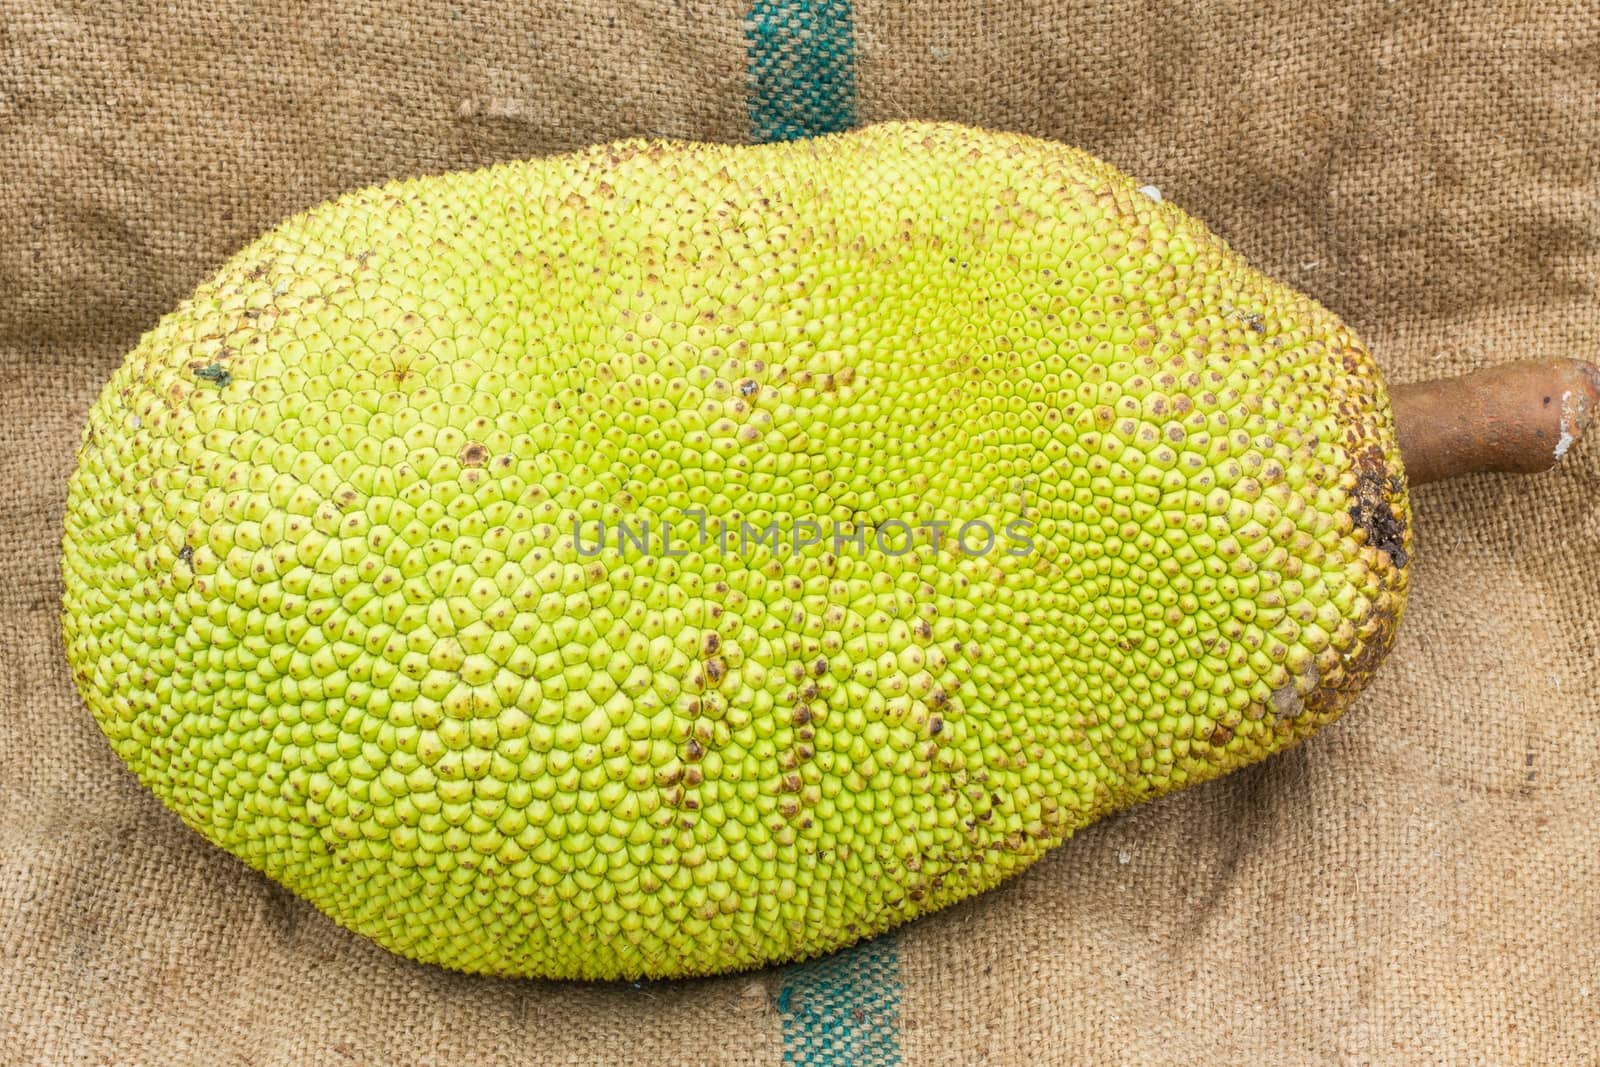 Young jackfruit on gunnysack by a3701027